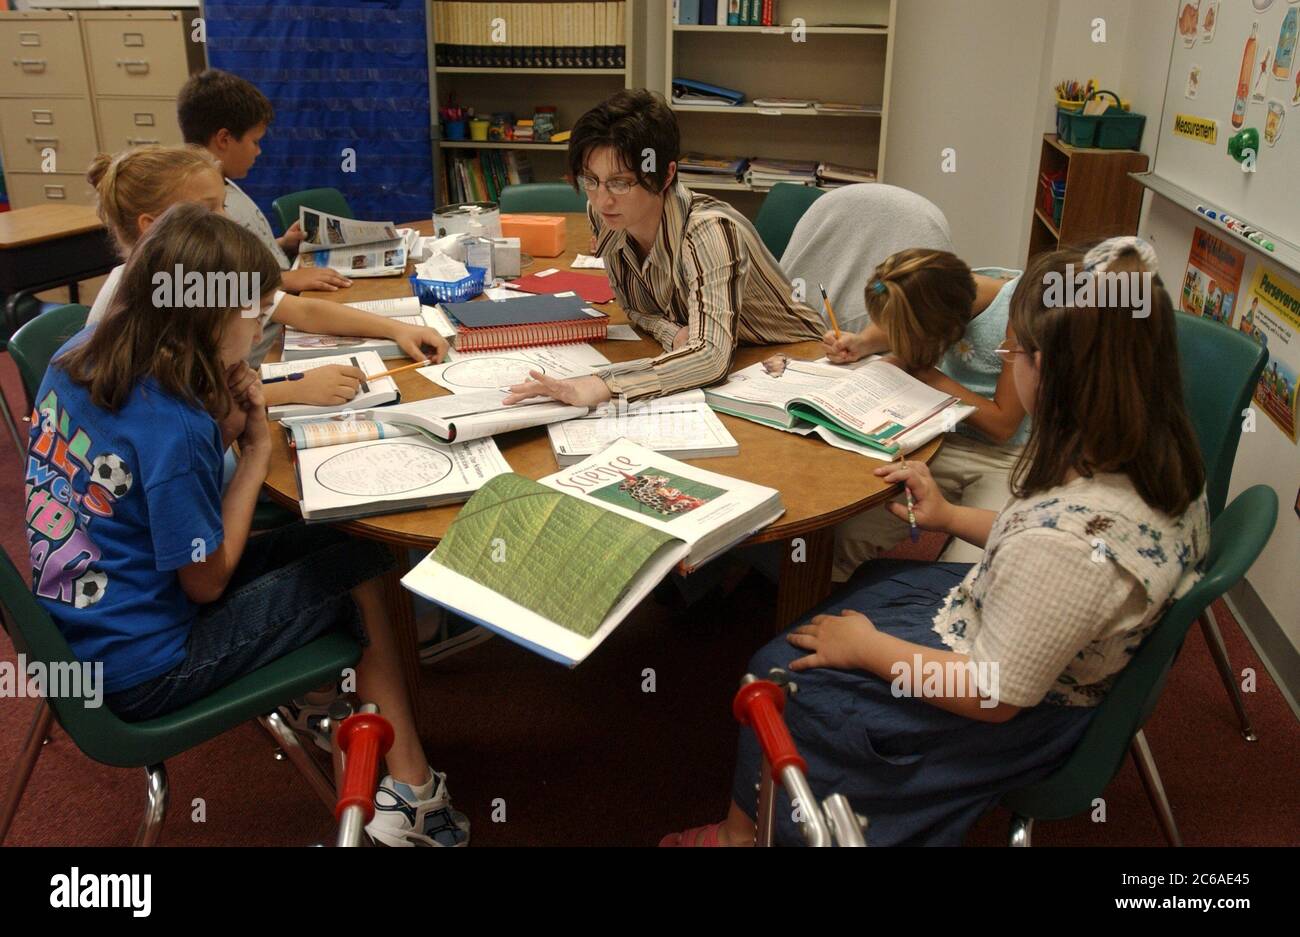 Gun Barrel City, Texas September 9, 2003: A physically handicapped girl (right) with cerebral palsy who uses a walker sits with classmates at a table with their teacher during a science lesson in their fifth-grade public school classroom. The school mainstreams its disabled students, placing them with normally abled students in all school settings.  MODEL RELEASE SP70 (girl with walker), others not released. ©Bob Daemmrich Stock Photo